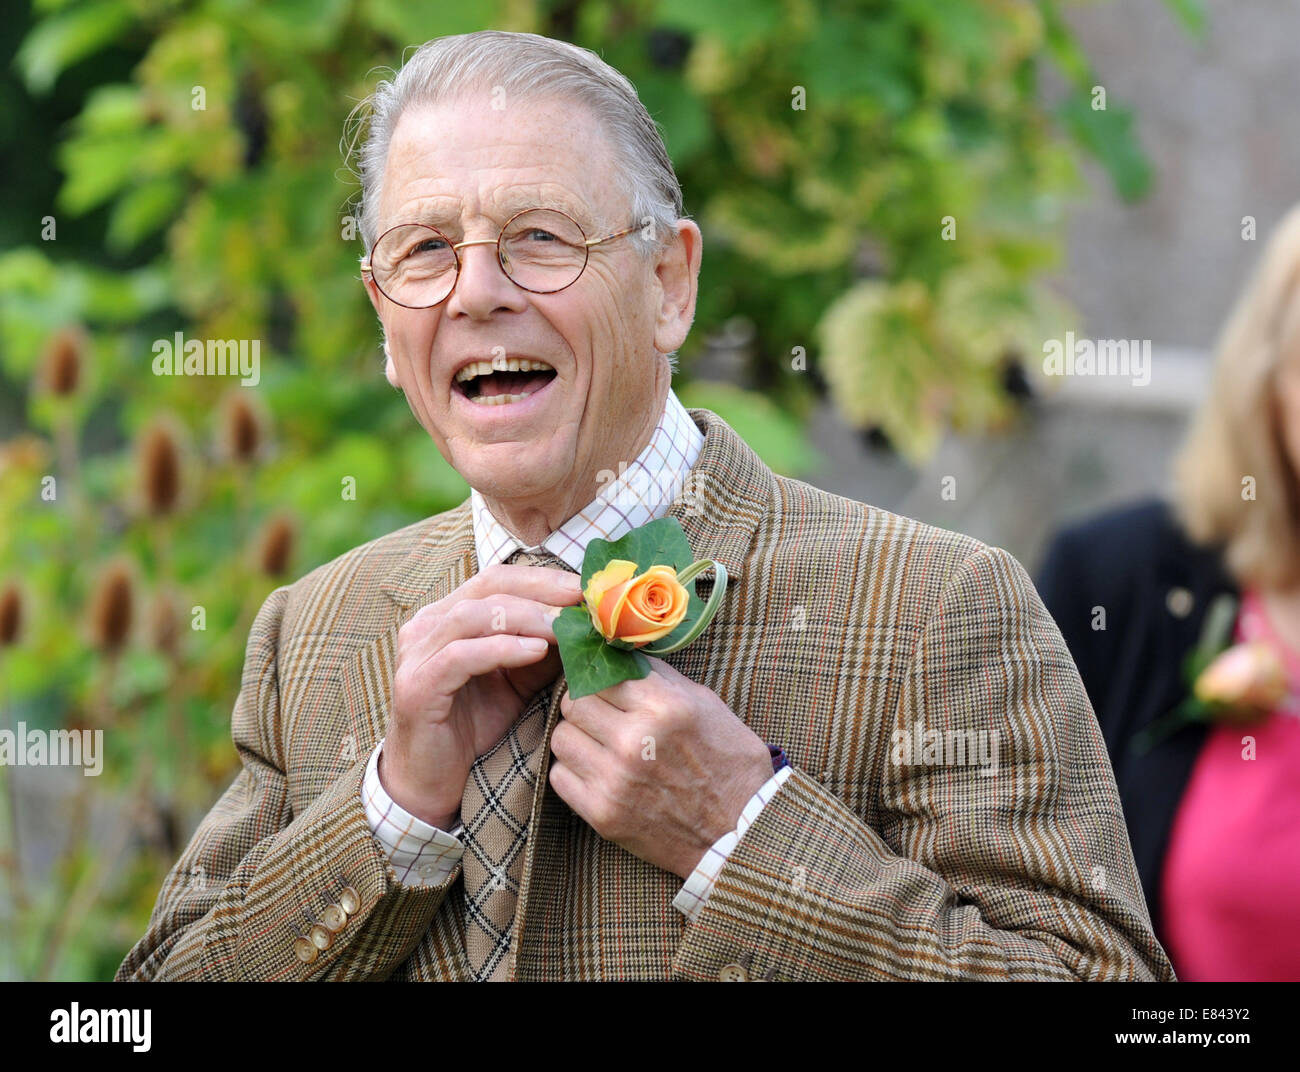 Dorset, UK. 29th Sep, 2014. Actor Edward Fox was joined by his wife and fellow actress Joanna David as they opened a set of new greenhouses at the Kingston Maurward Horticultural College in their home county of Dorset, Britain. Credit:  Dorset Media Service/Alamy Live News Stock Photo